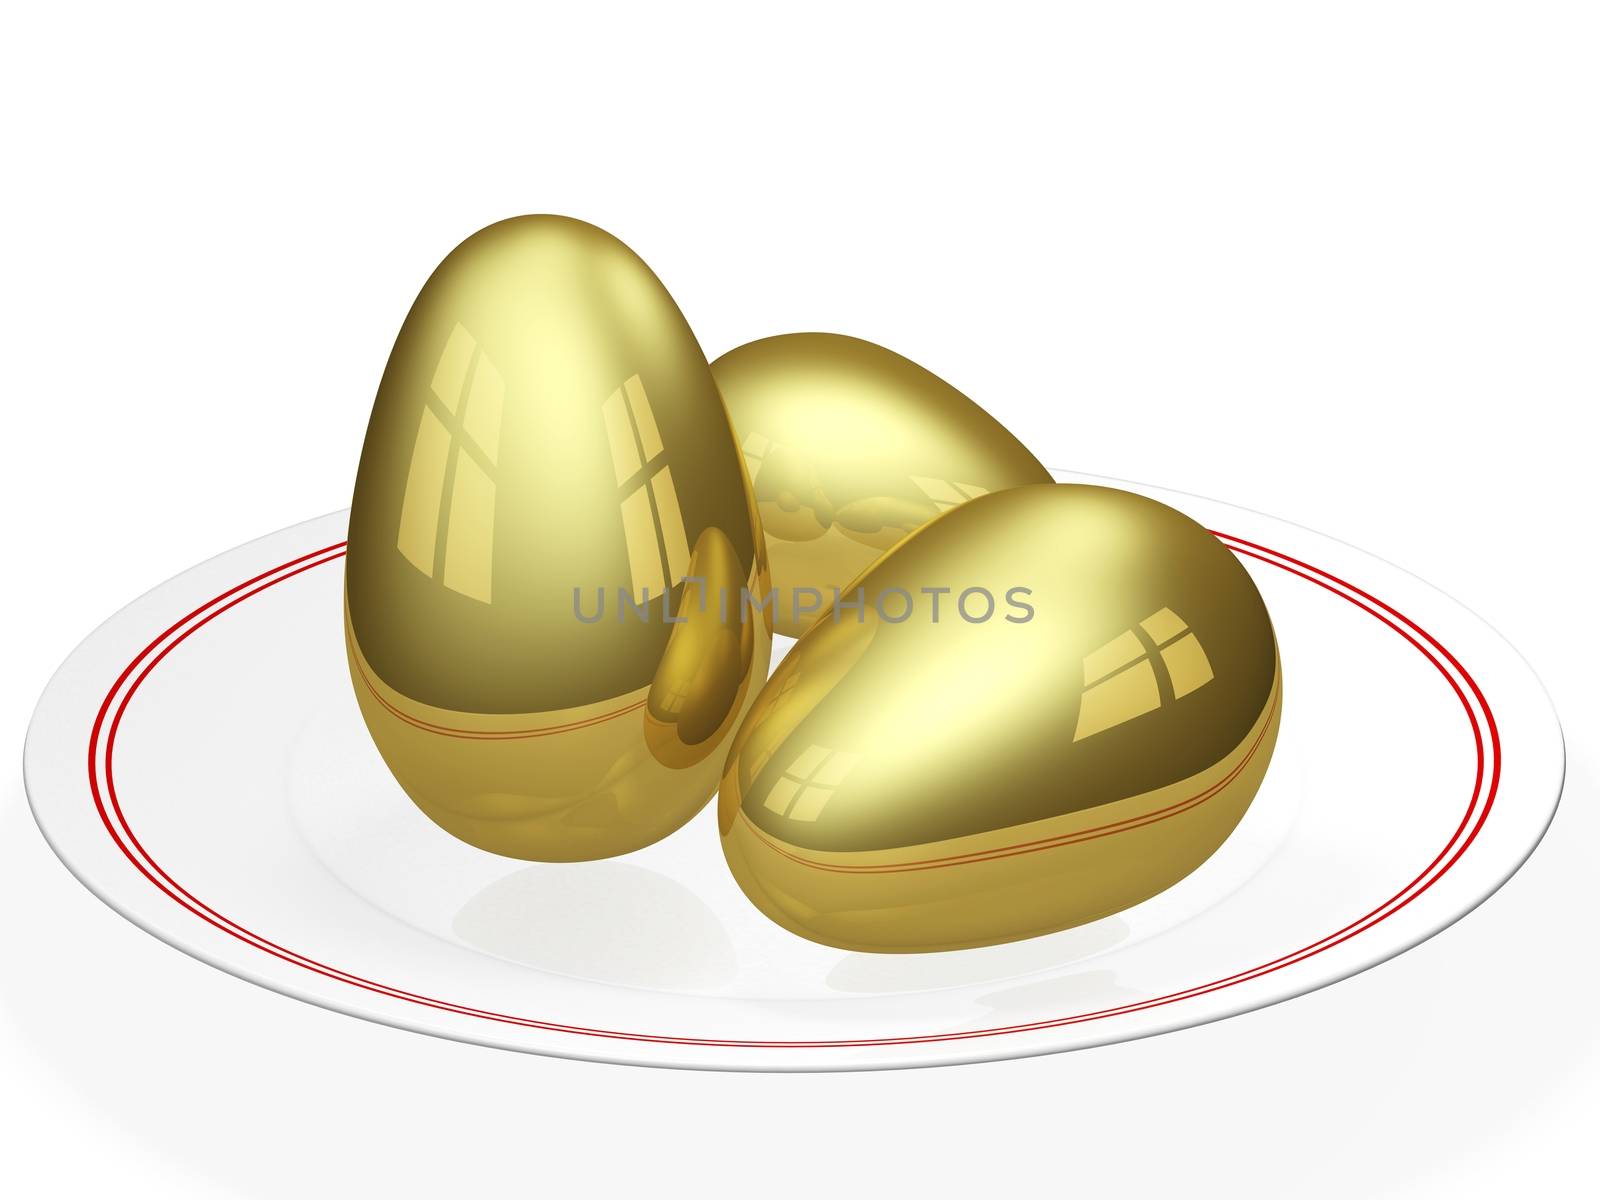 Three gold eggs kept in a ceramic dining plate. Can be used for concepts of health as well as wealth
